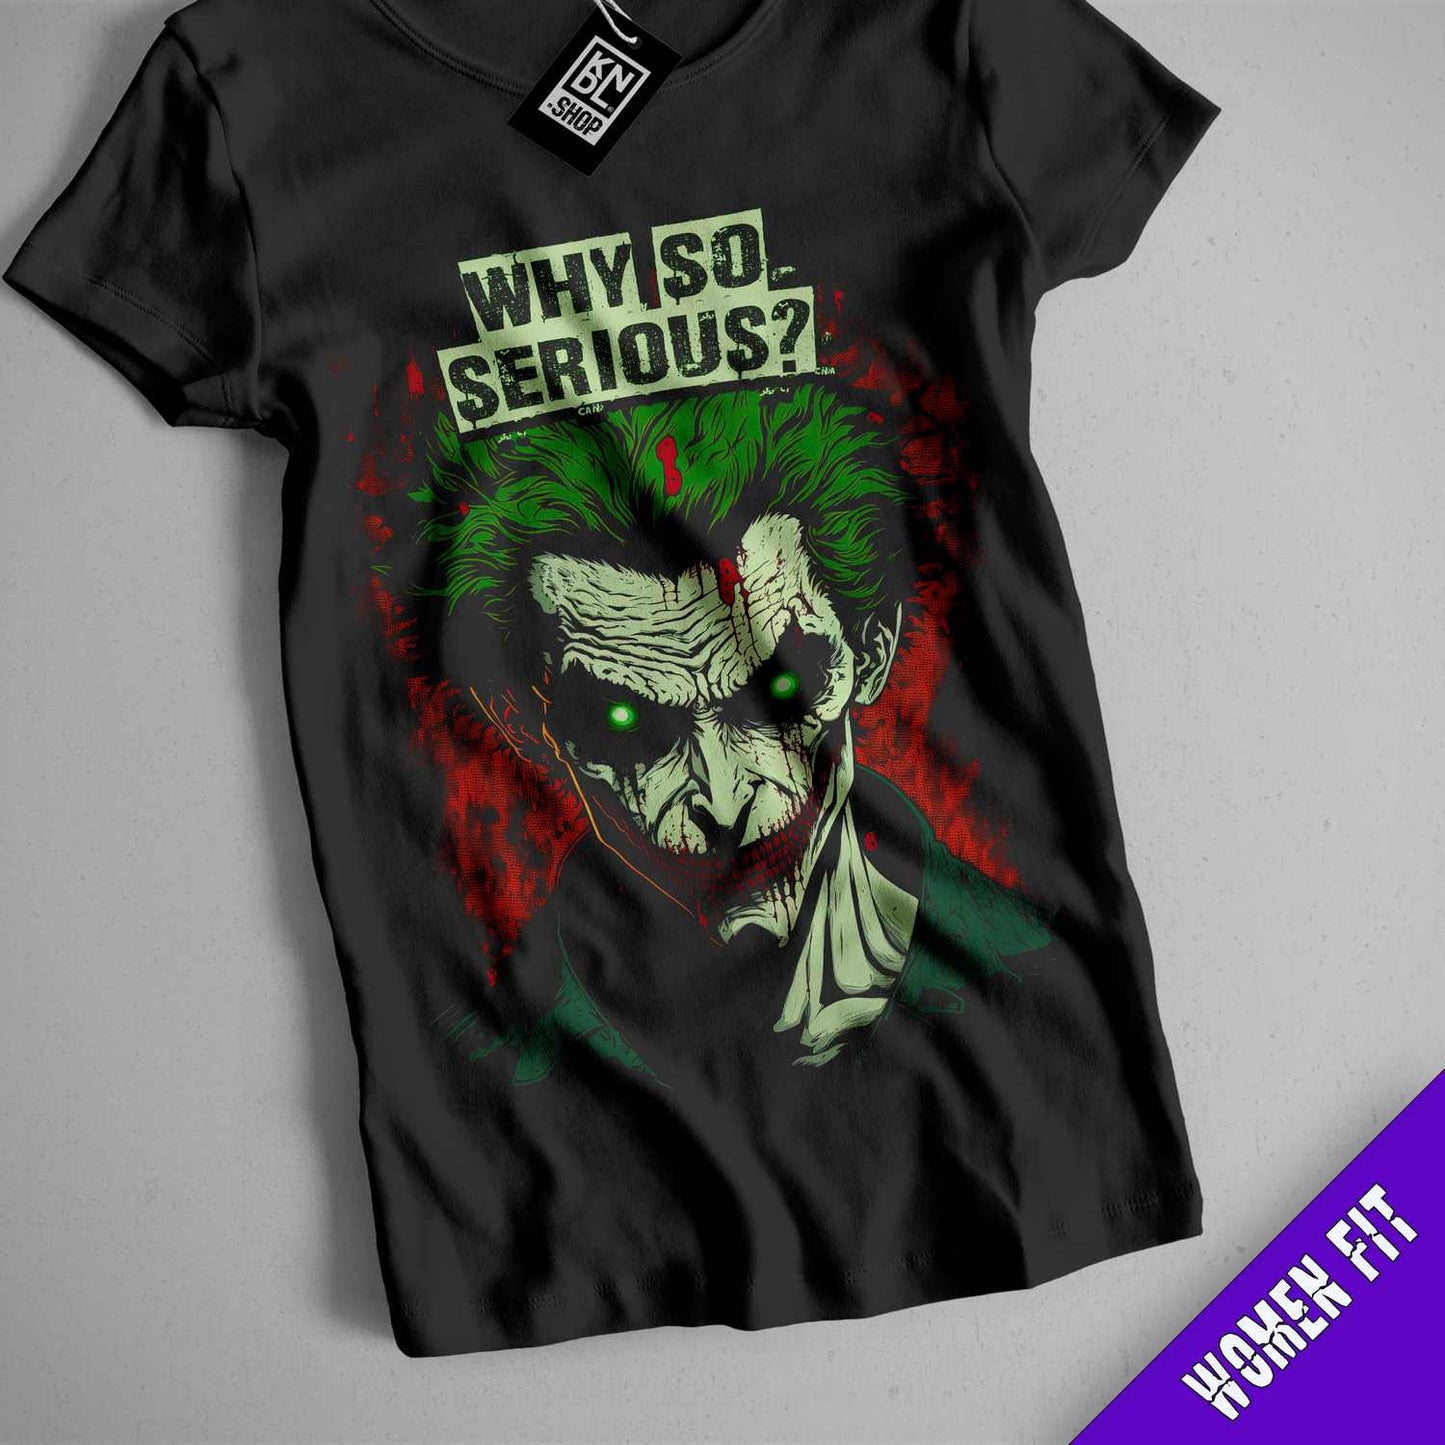 a black t - shirt with a picture of the joker on it